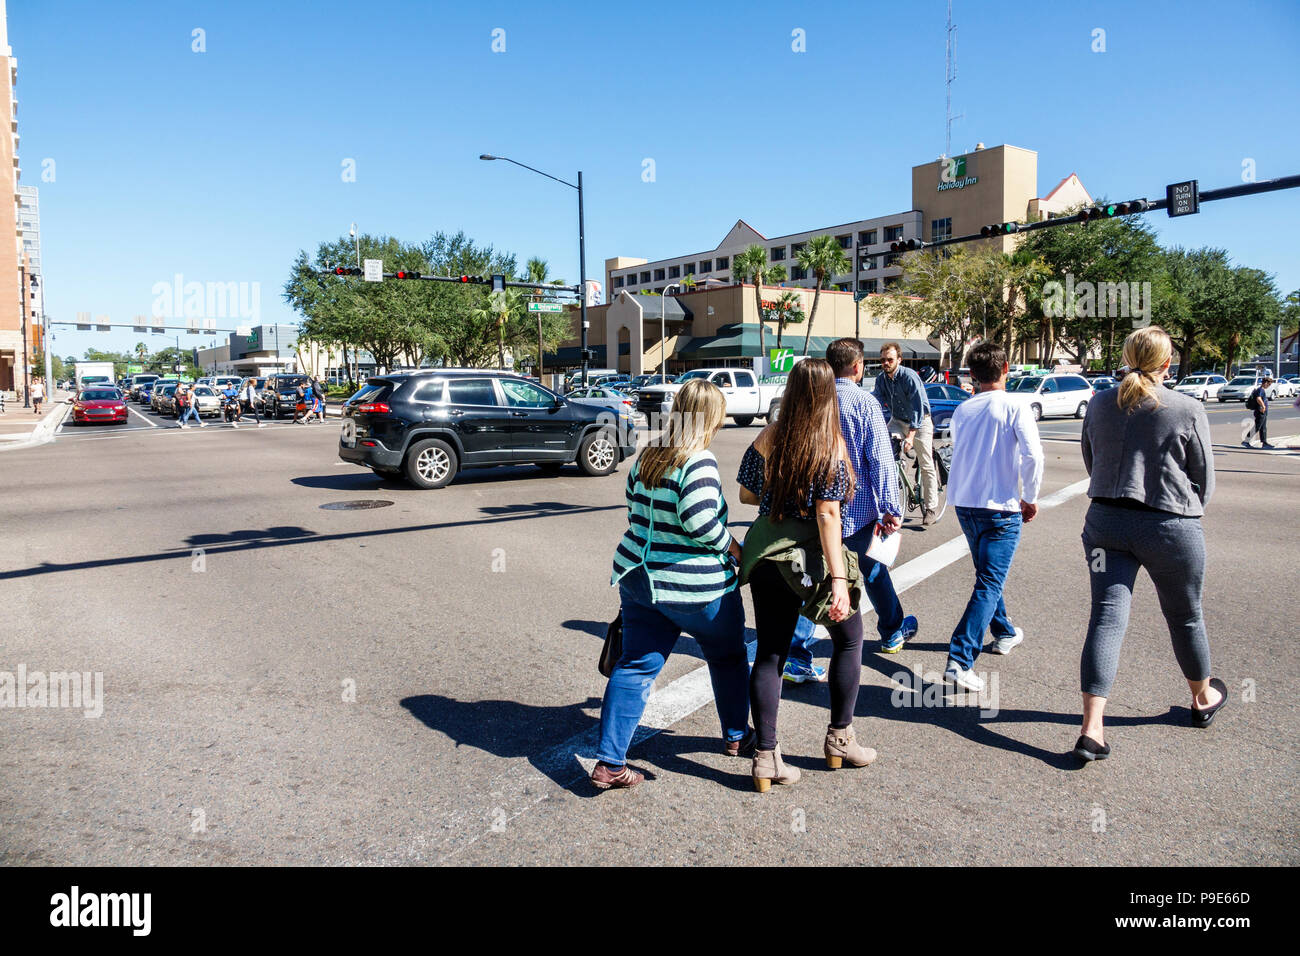 Gainesville Florida,University Avenue,college town,traffic intersection,street crossing,student students education pupil pupils,adult adults woman wom Stock Photo